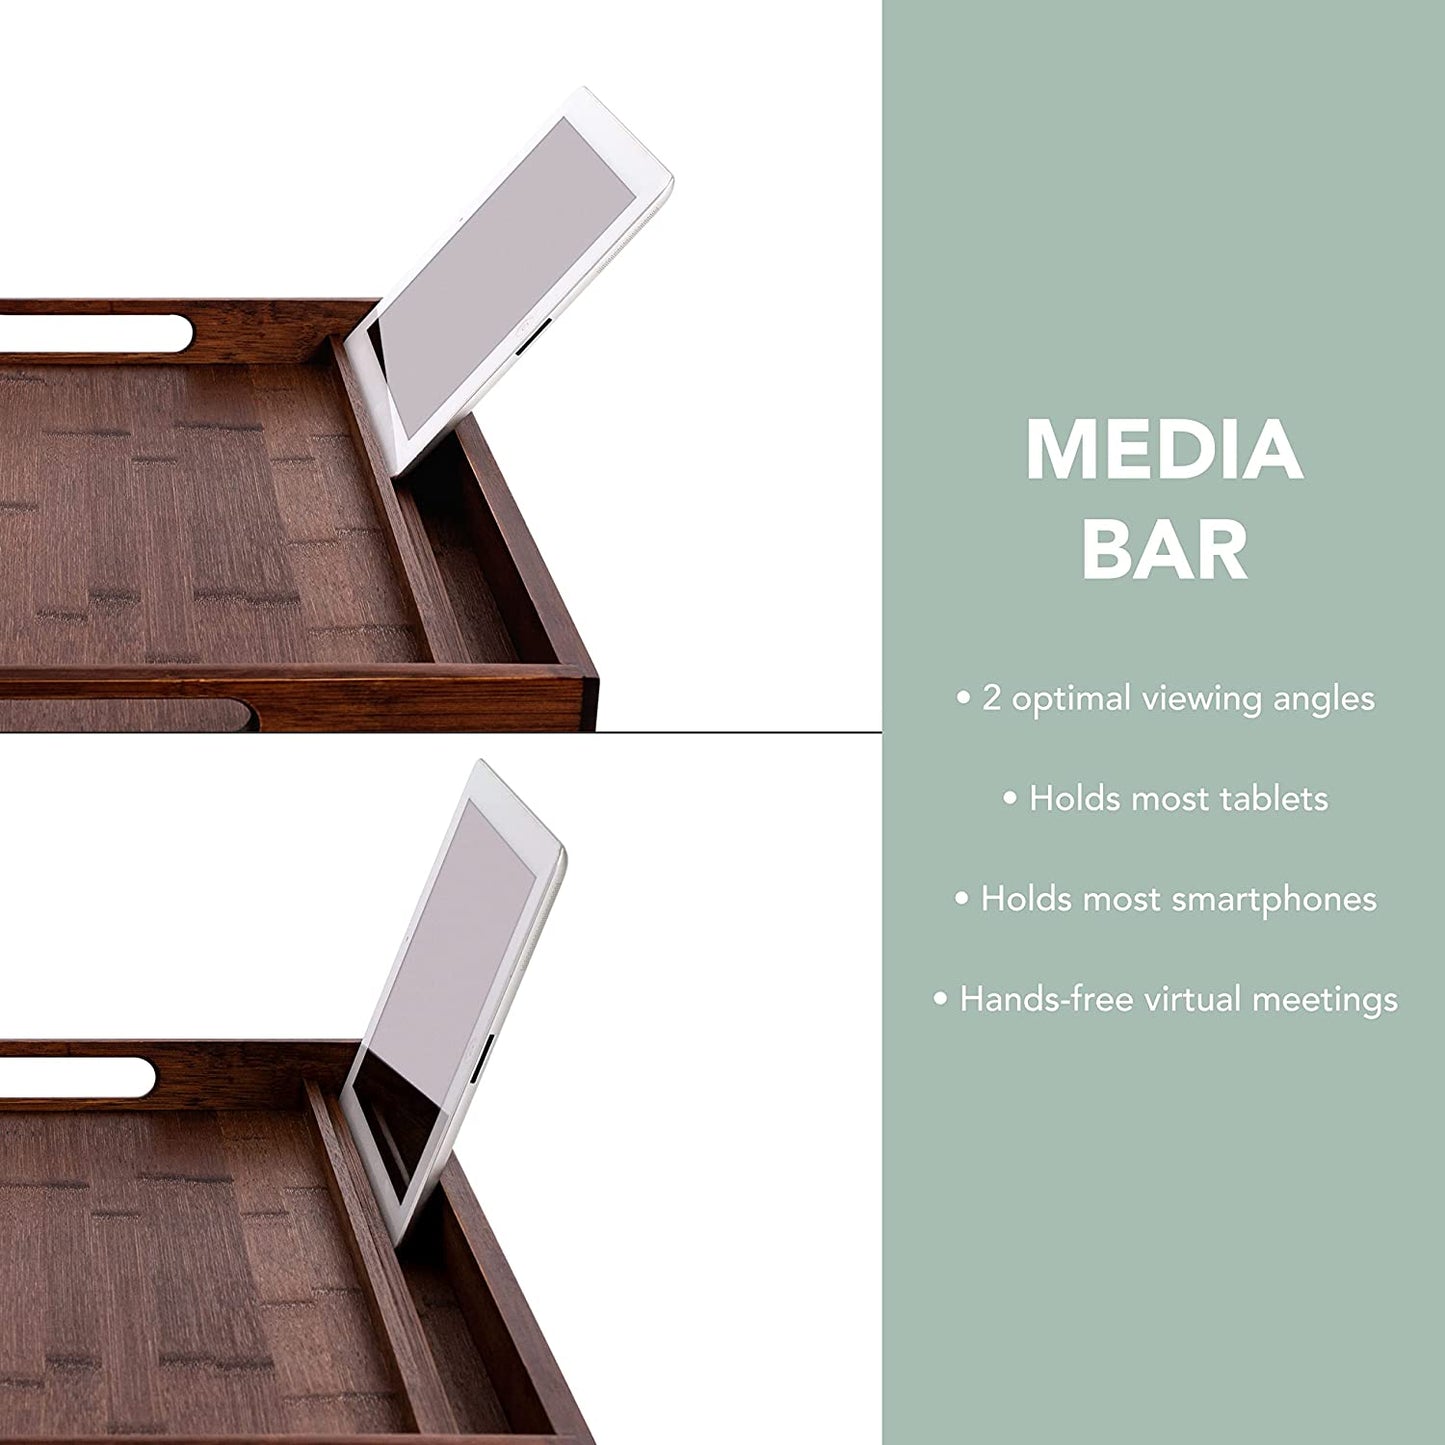 "Luxurious Bamboo Lap Desk with Phone Holder - Perfect for Laptops and Tablets up to 17.3 Inches - Stylish Java Design - Style No. 78112"